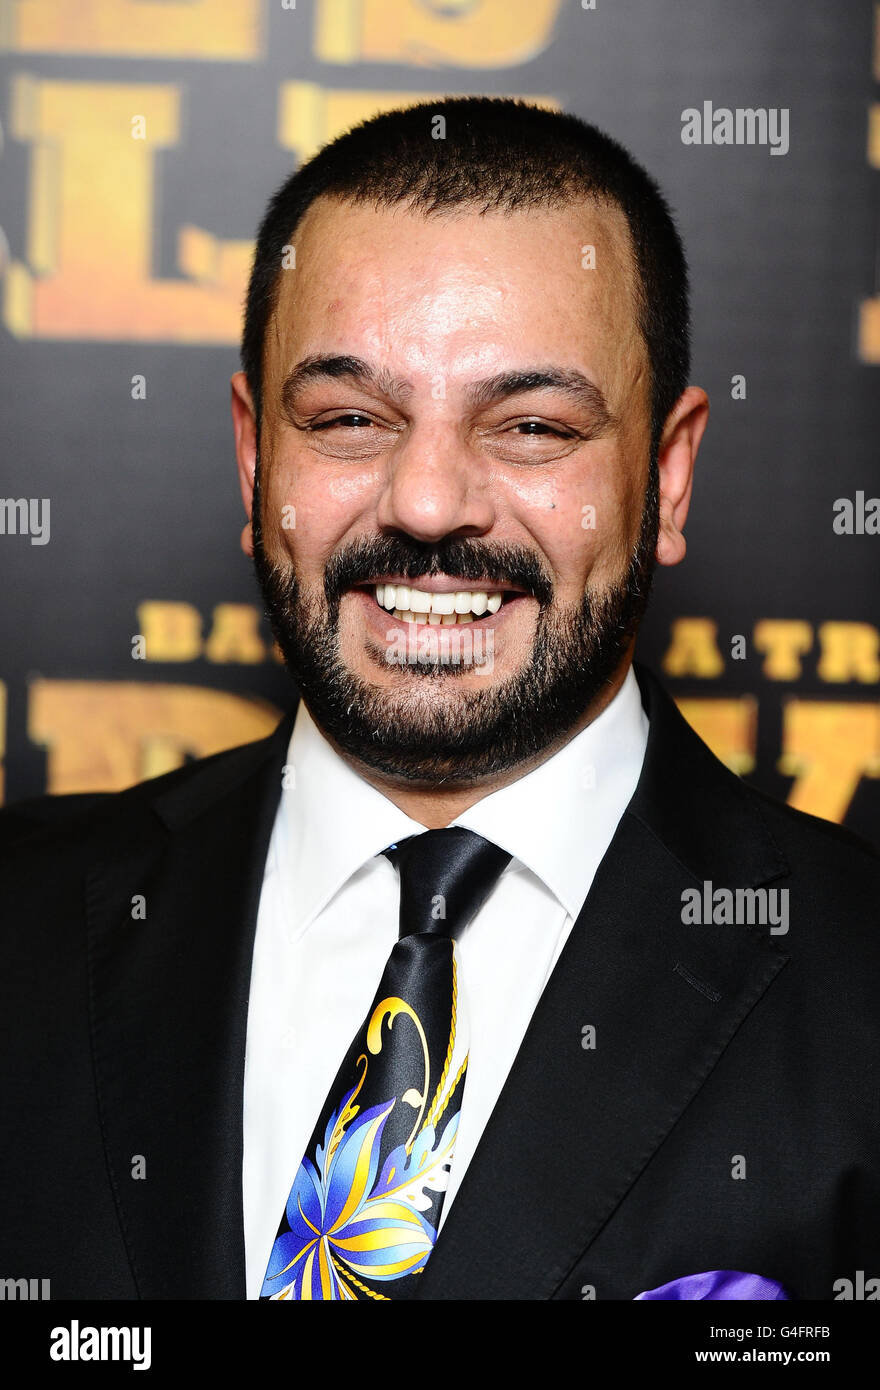 Latif Yahia arrives at the premiere of The Devil's Double at the Vue Cinema in London. Stock Photo